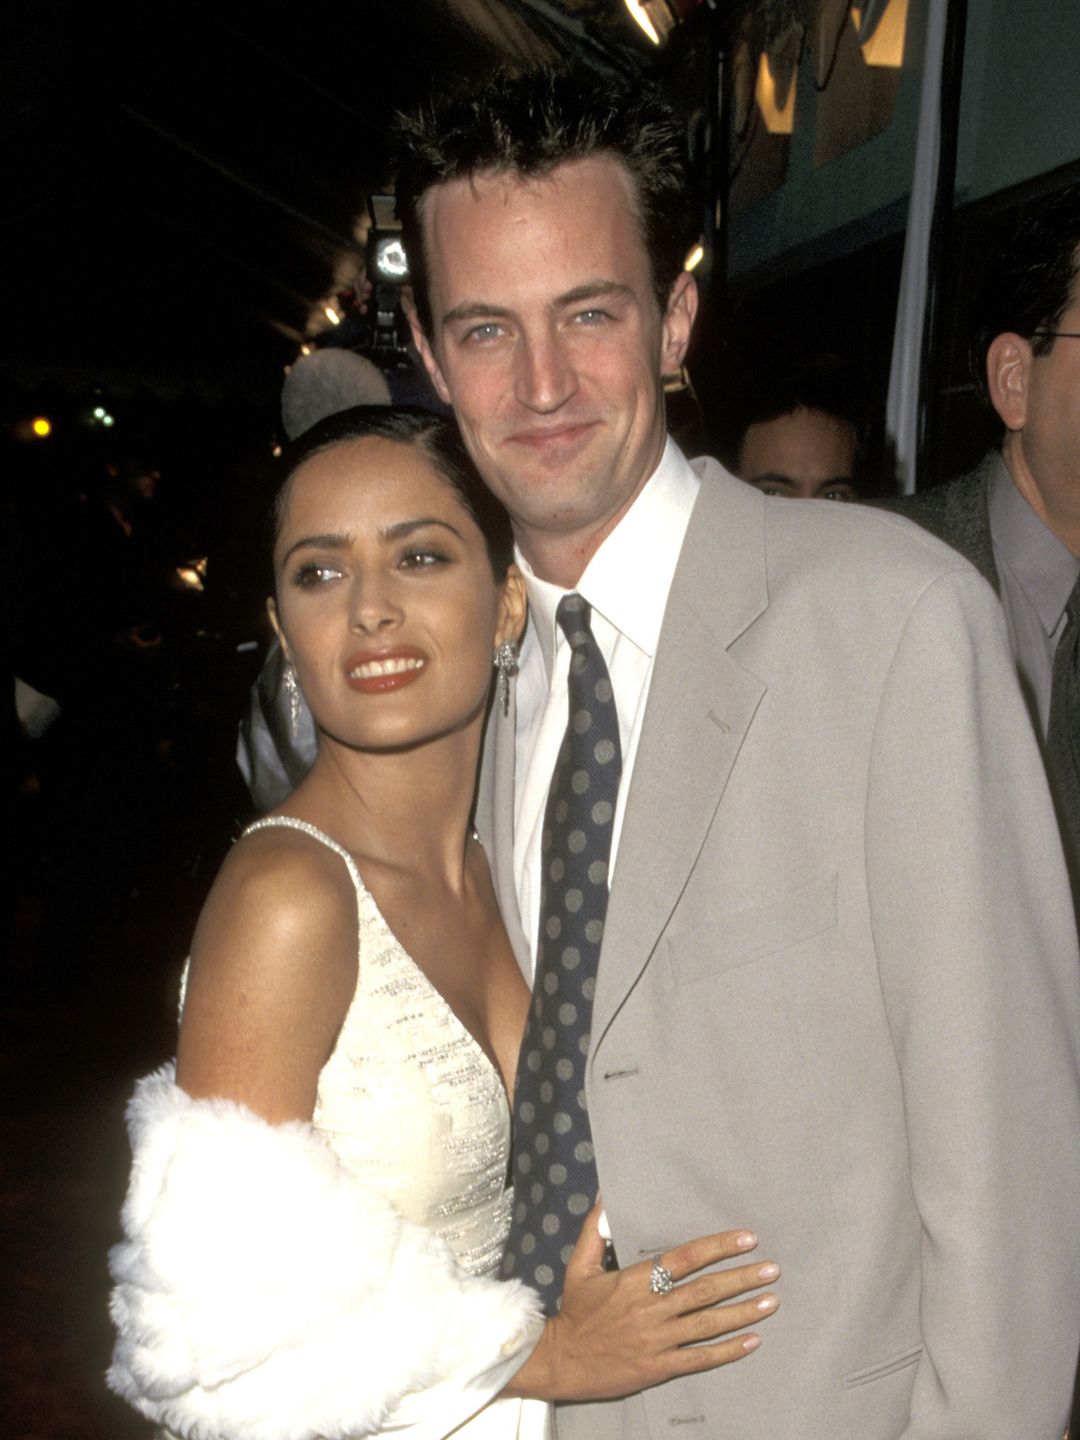 Salma Hayek and Matthew Perry at the Fools Rush in premiere in los Angeles on February 11, 1997